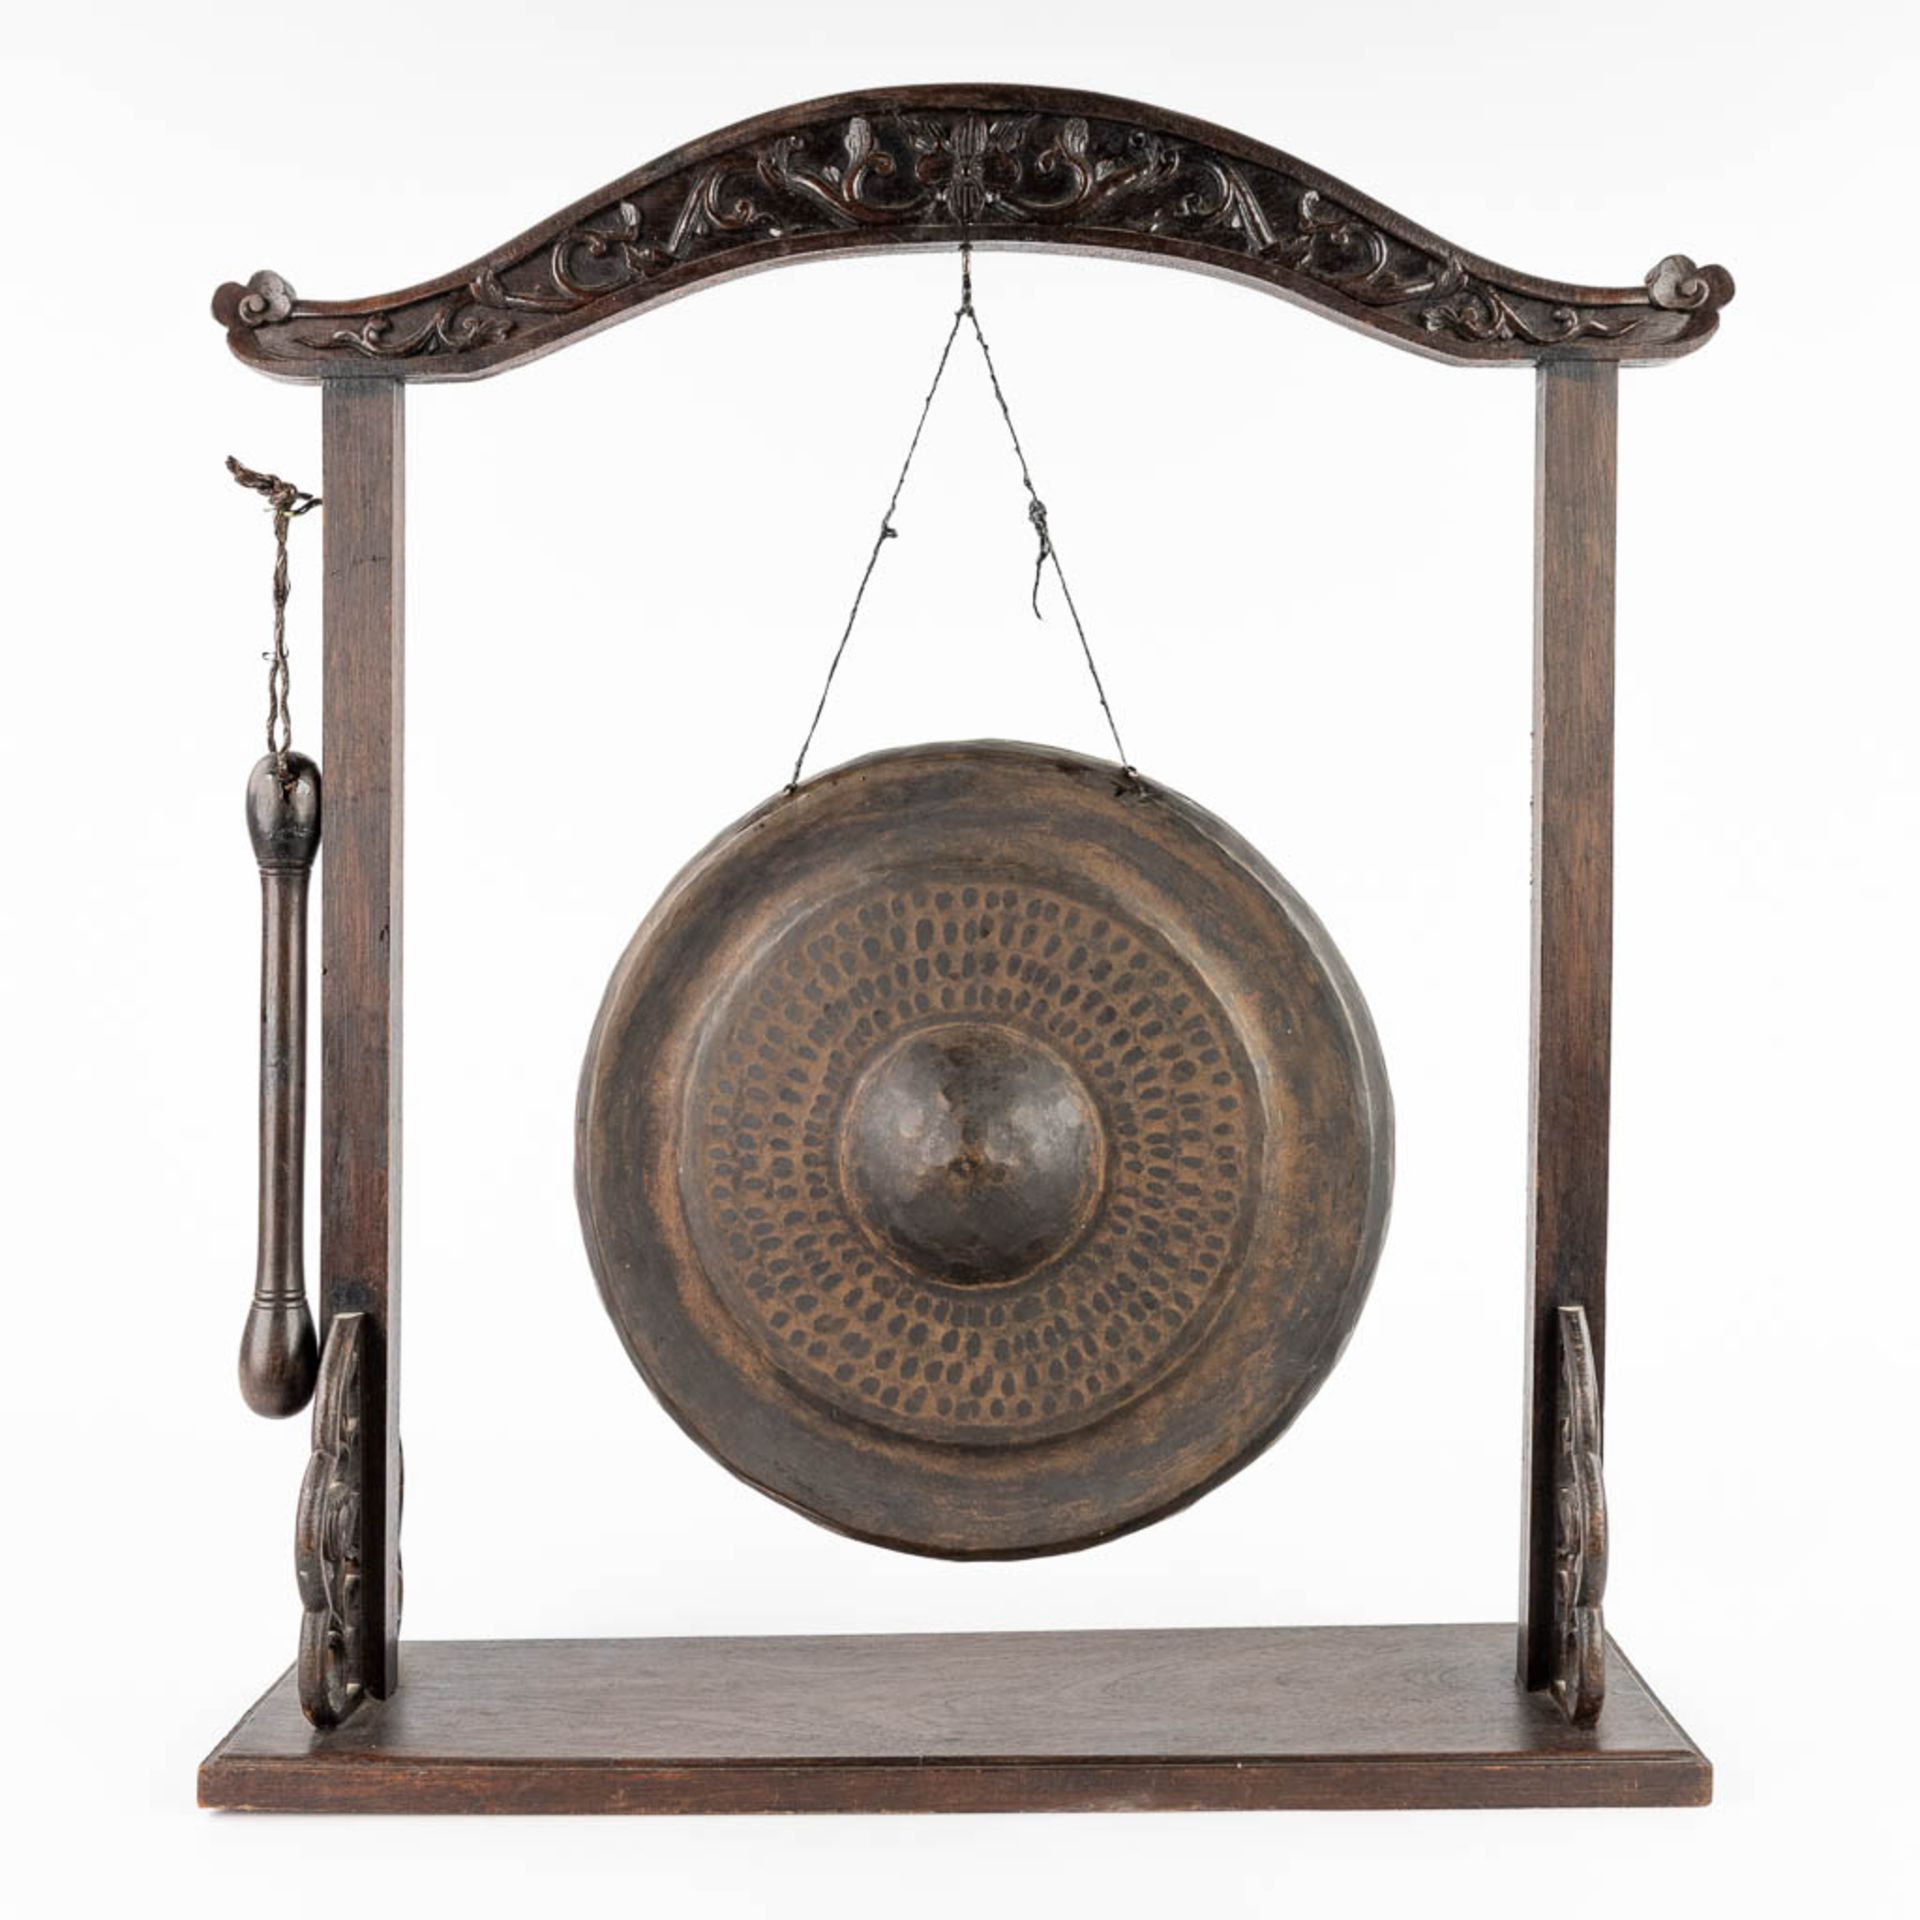 3 bells and a gong, Oriental. 19th/20th C. (L:13 x W:47 x H:55 cm) - Image 3 of 28